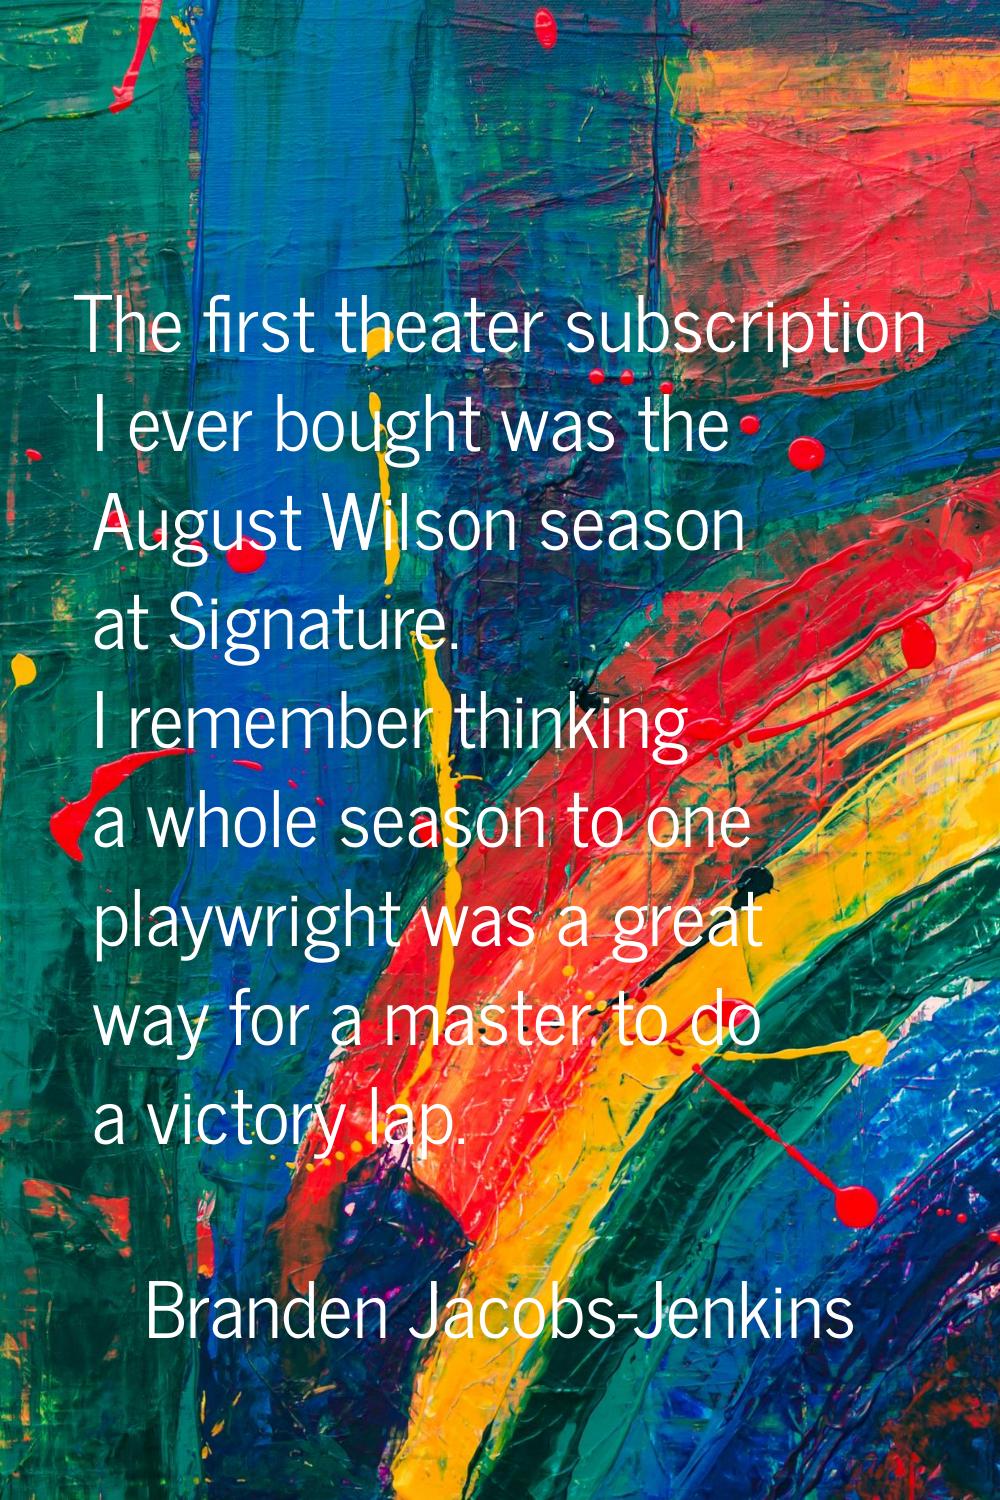 The first theater subscription I ever bought was the August Wilson season at Signature. I remember 